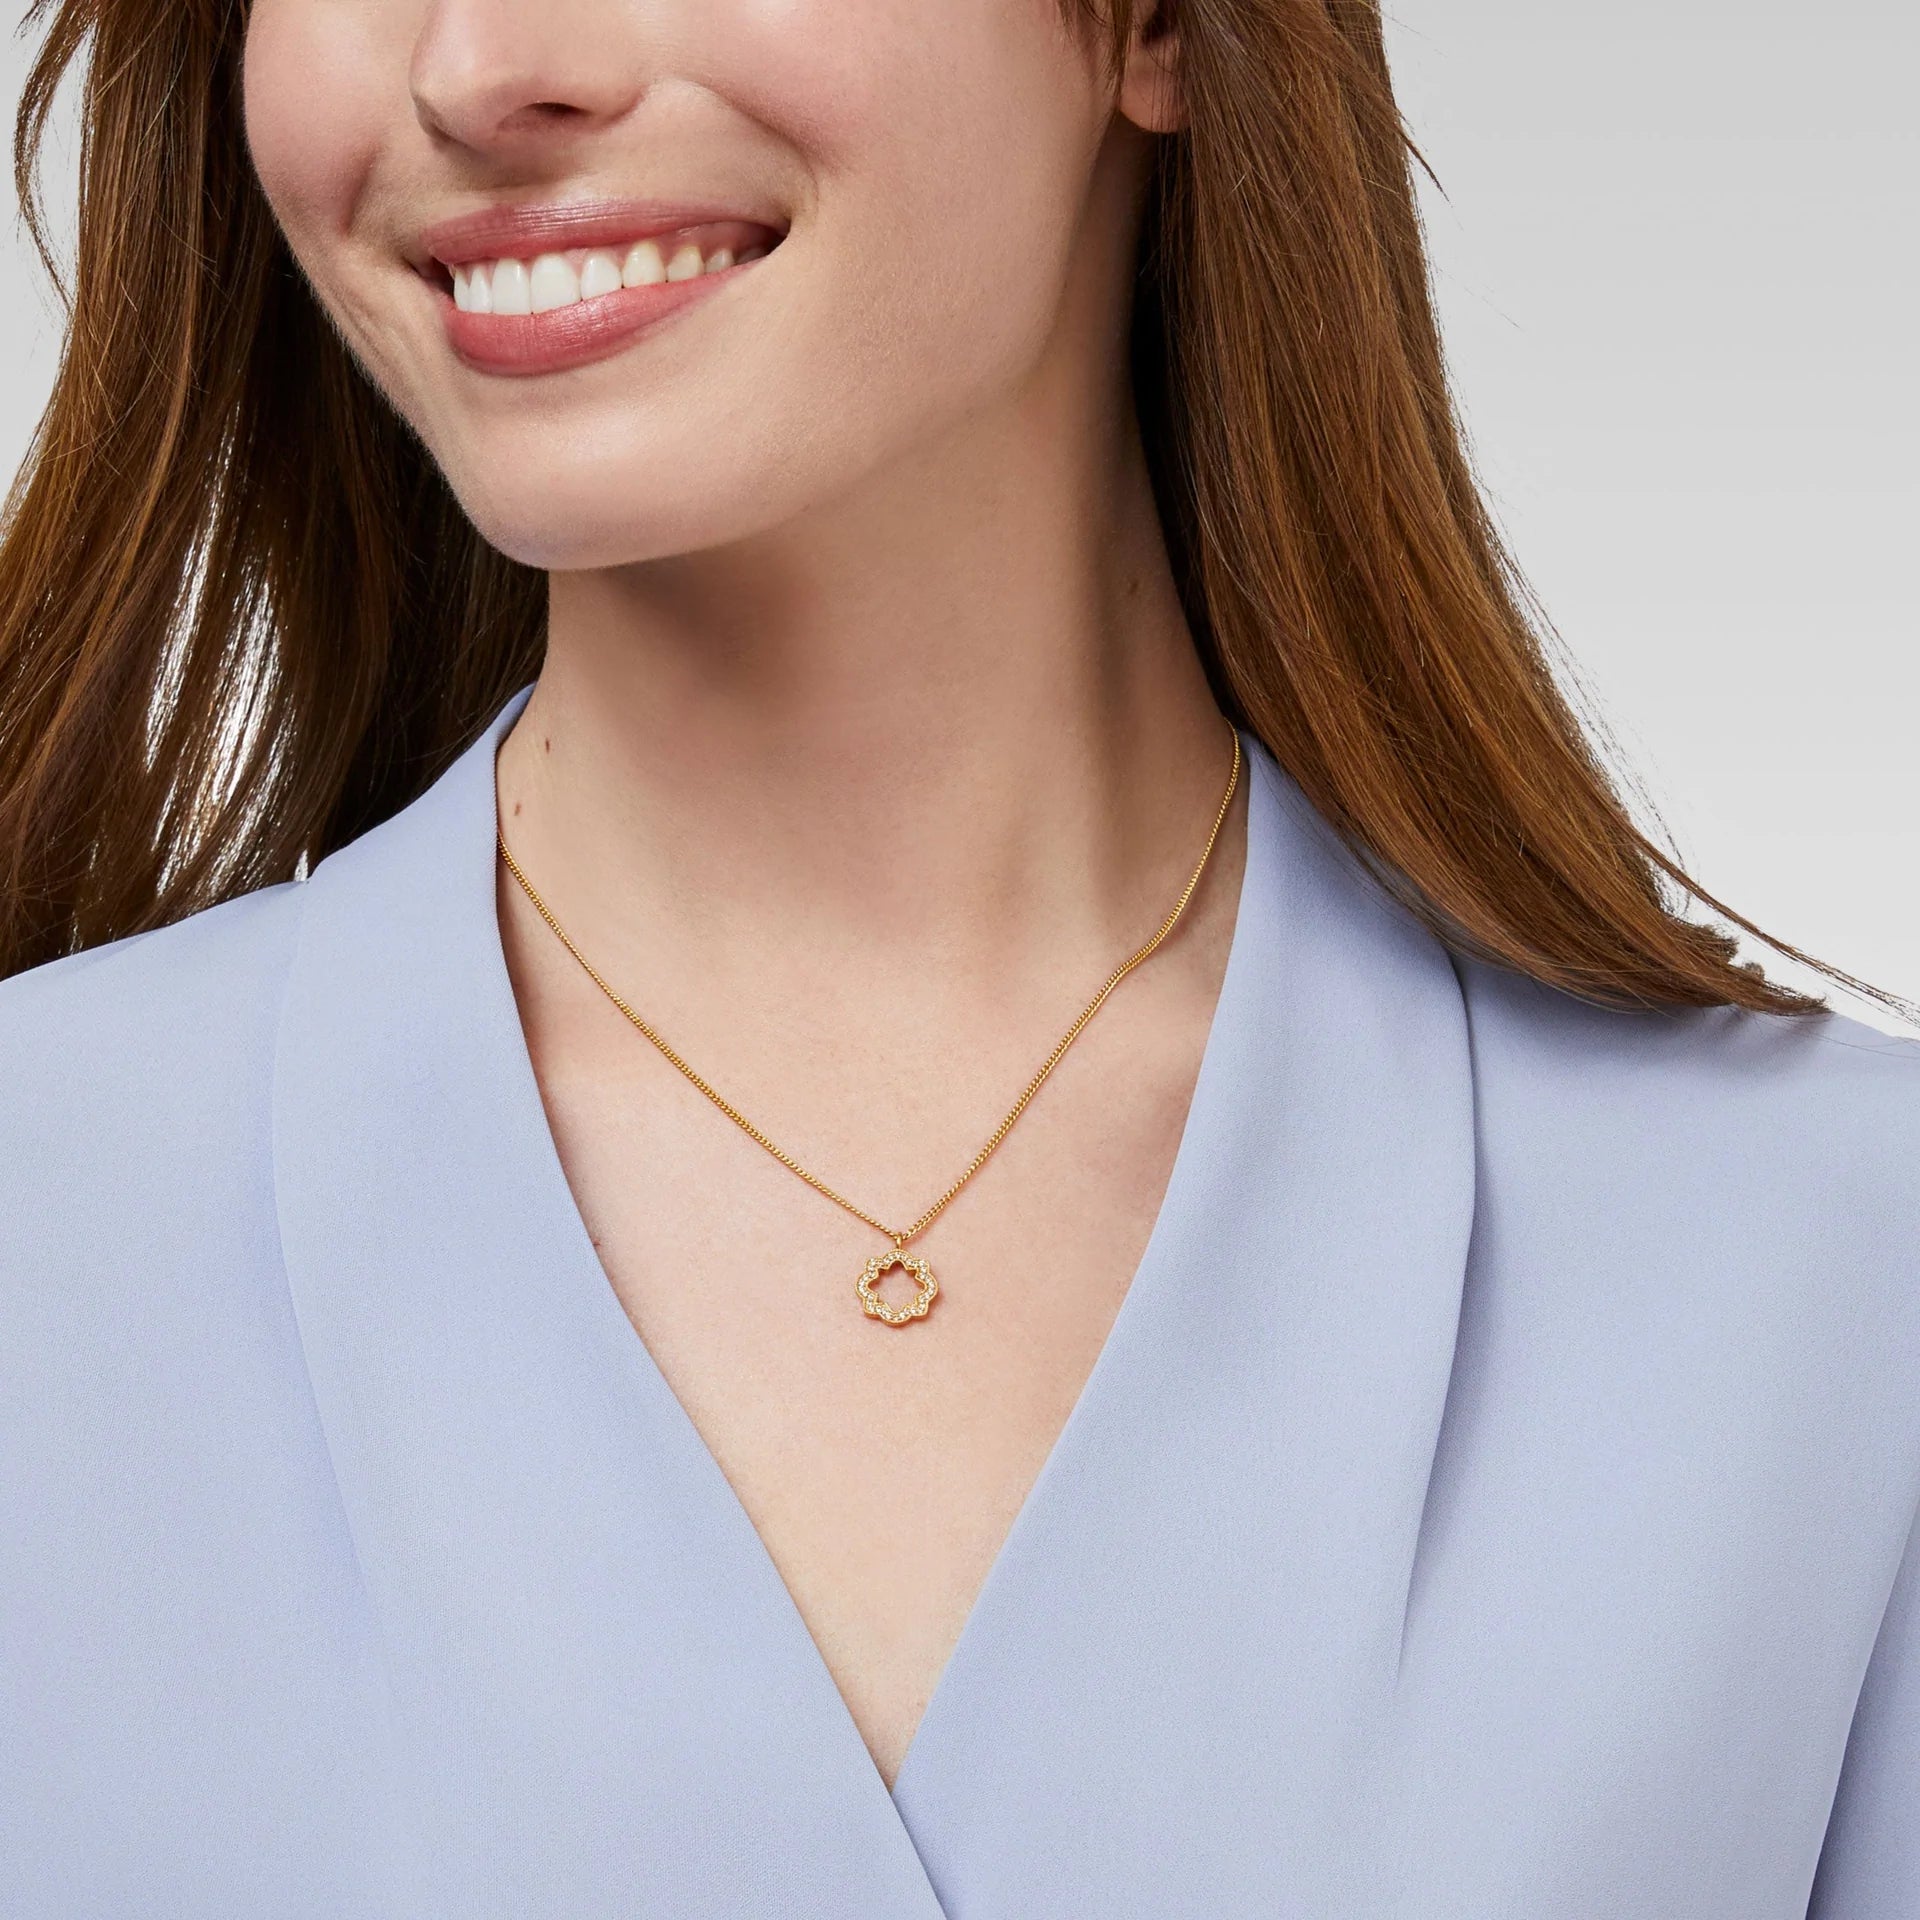 Odette Solitaire Necklace by Julie Vos. Pavé classic quatrefoil shape with a bit of negative center space. 24K gold plate, cubic zirconia, measures 16.5-17.5 inch adjustable length. Charm measures 0.7 inch length. Shop at The Painted Cottage in Edgewater, MD